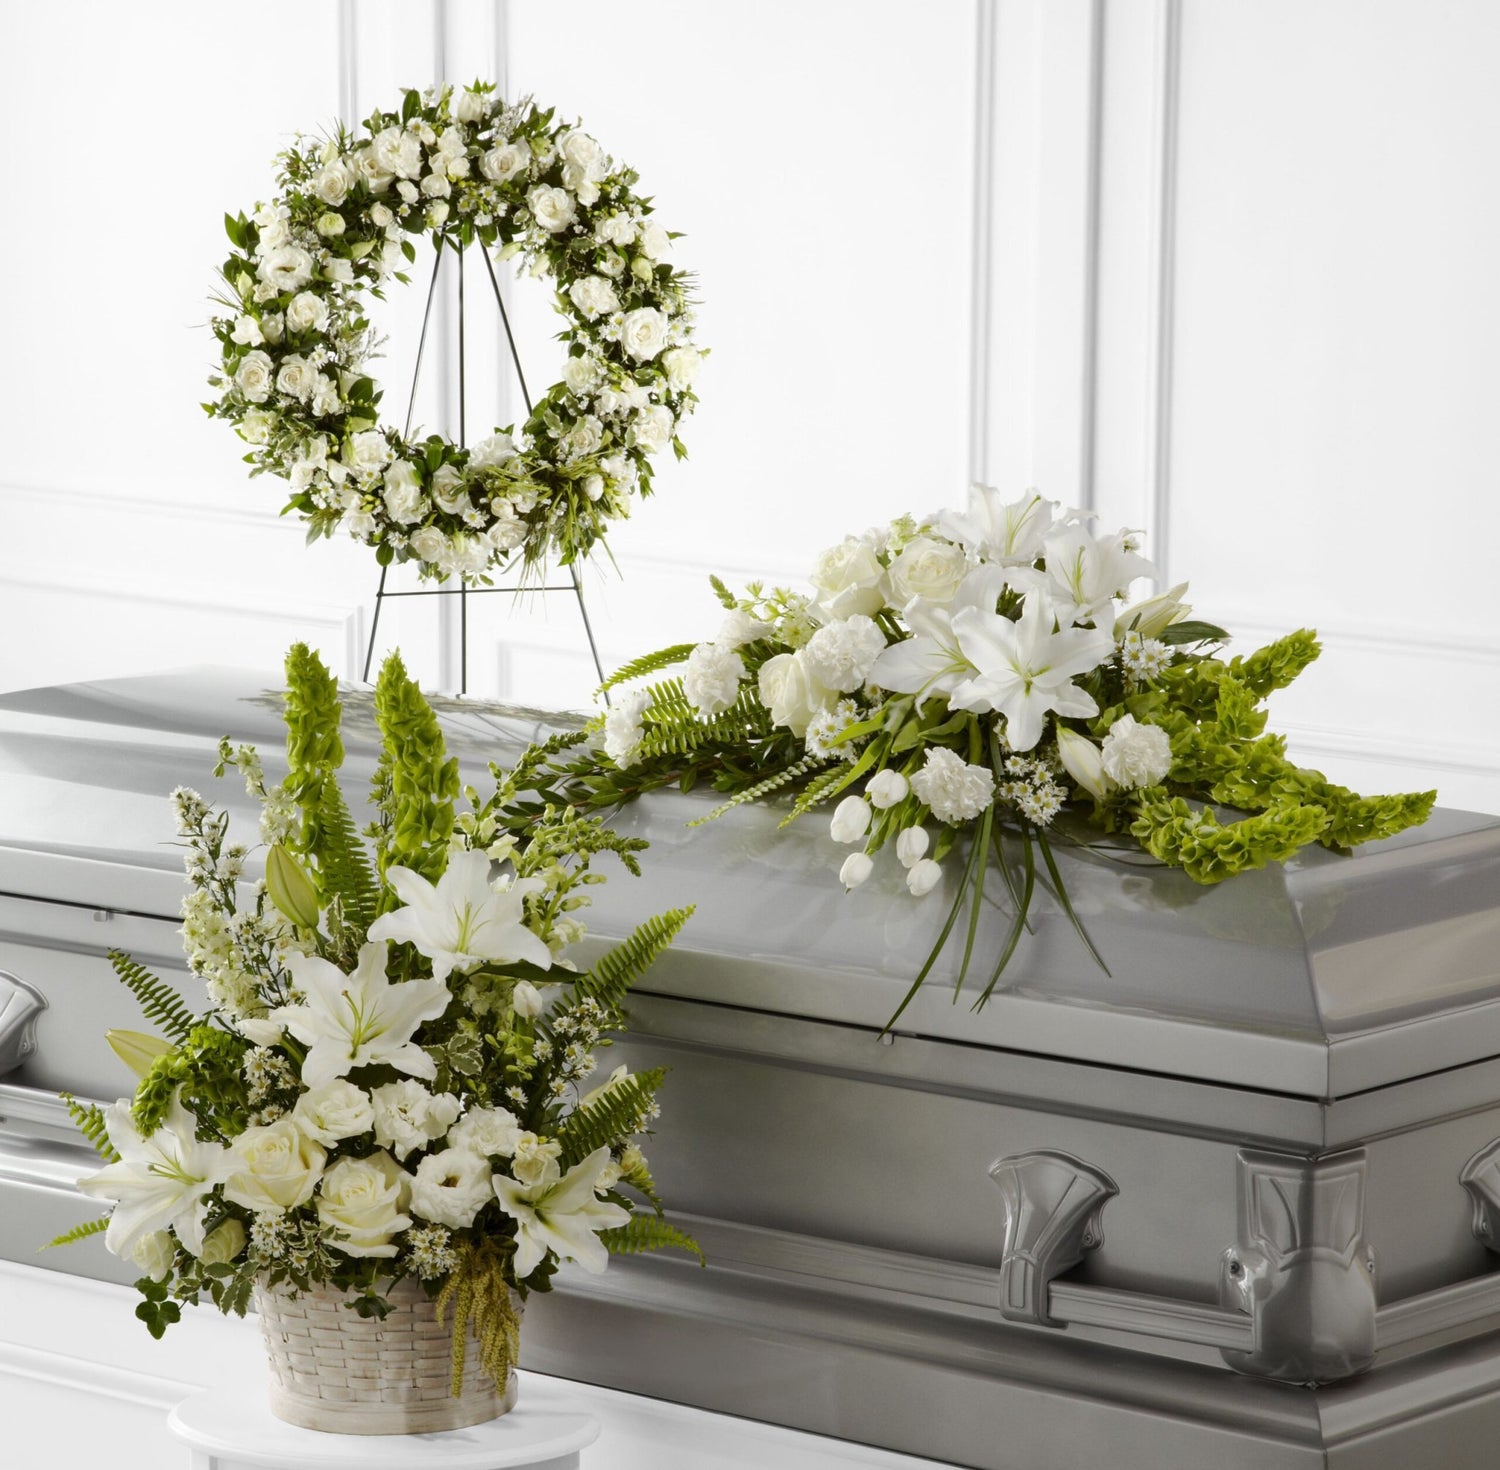 Funeral Baskets - Queens Flower Delivery